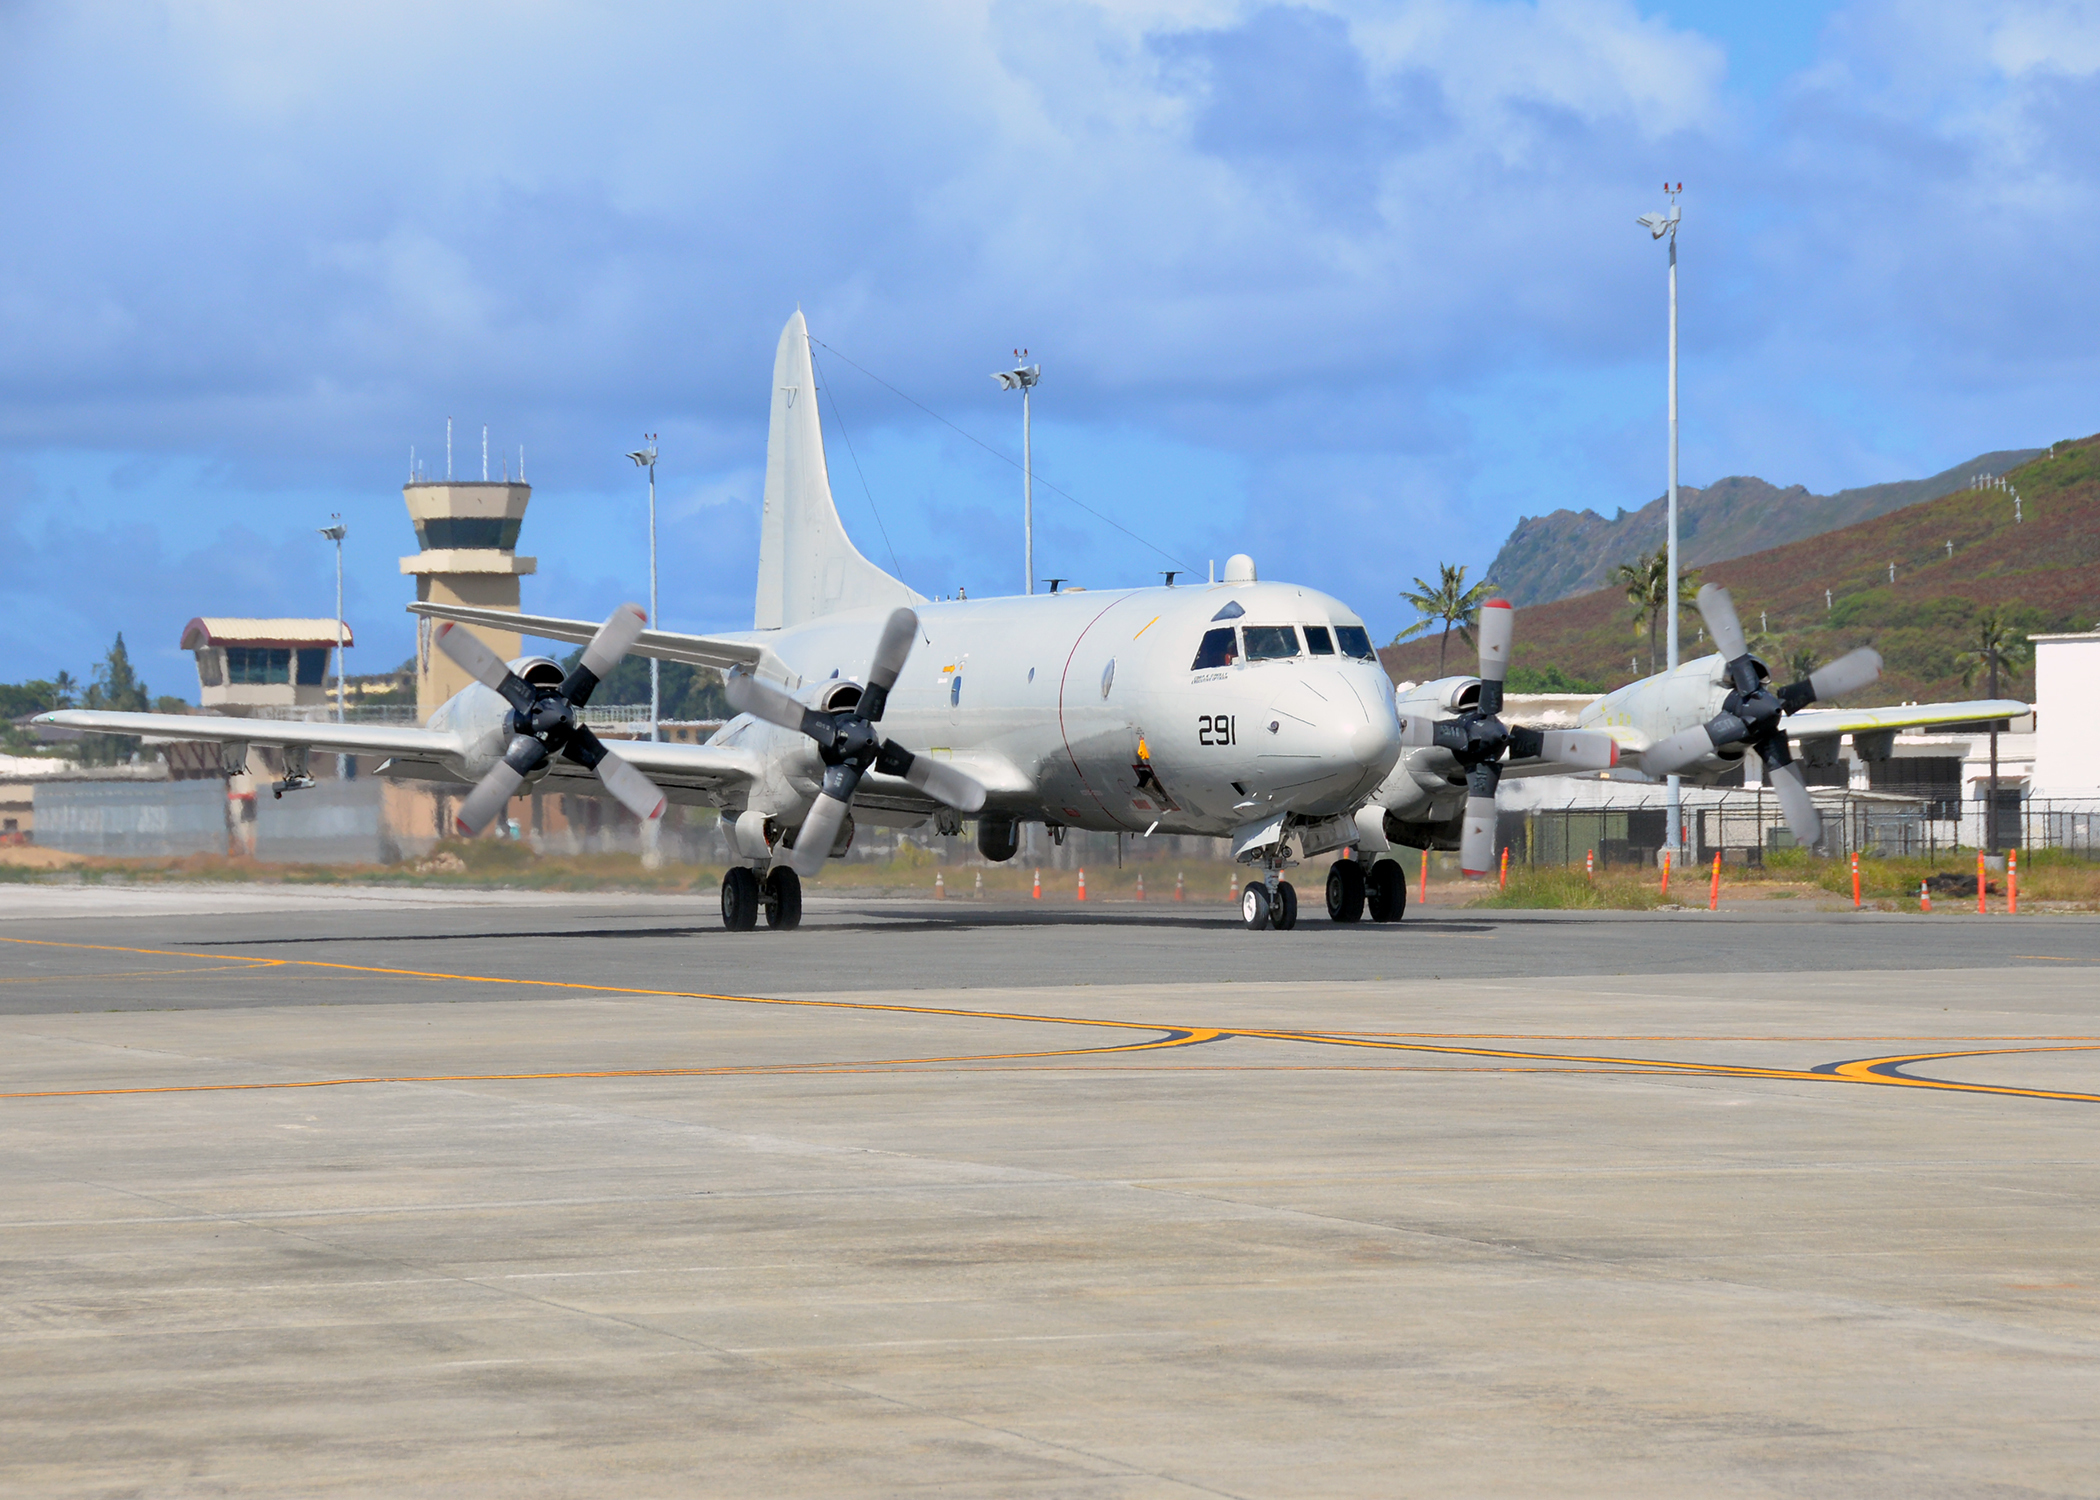 A P-3C Orion maritime surveillance plane was one of one the U.S. military aircraft tracked over or near the Korean peninsula this week in the wake of North Korea's reference to giving a "Christmas gift" to the U.S. (Breanna Ancheta–U.S. Navy)